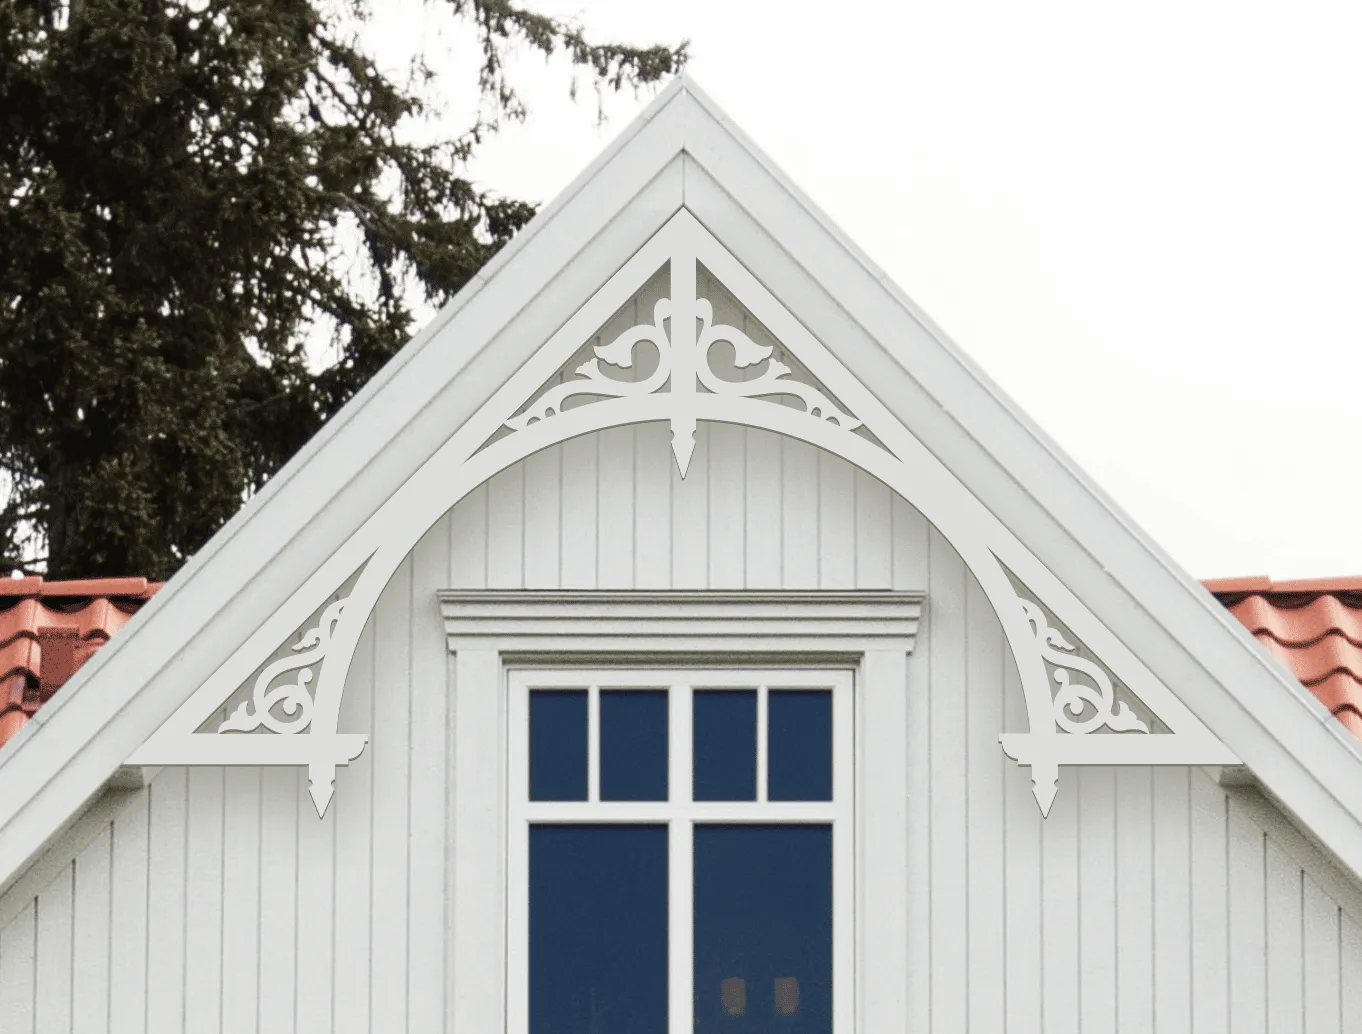 Gable pediment 050 - A white house with decorative wooden victorian millwork as house decoration for roof and gable end.